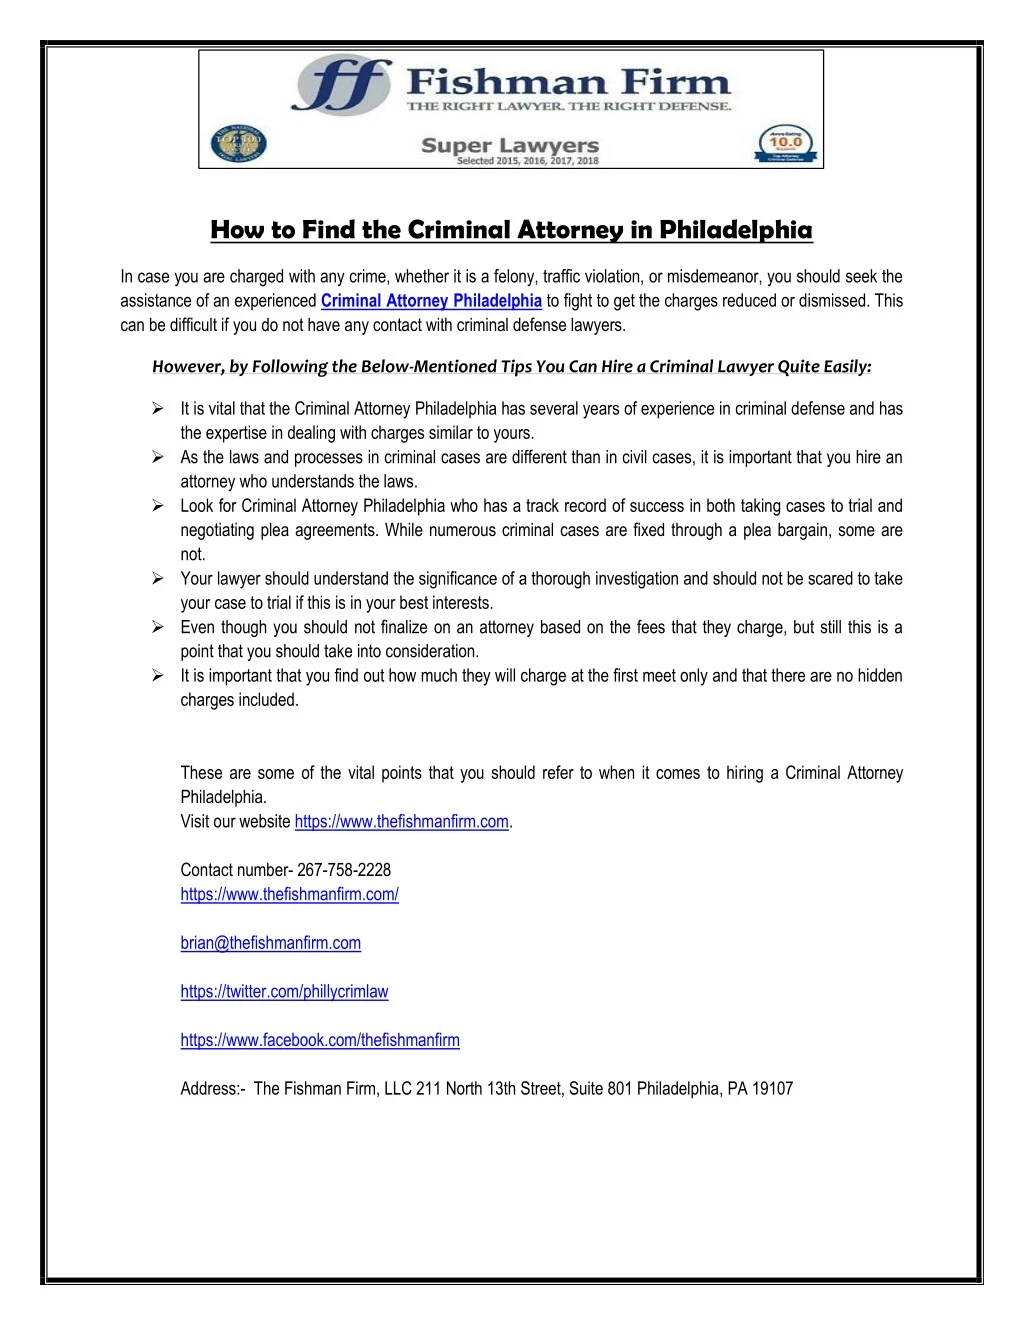 how to find the criminal attorney in philadelphia